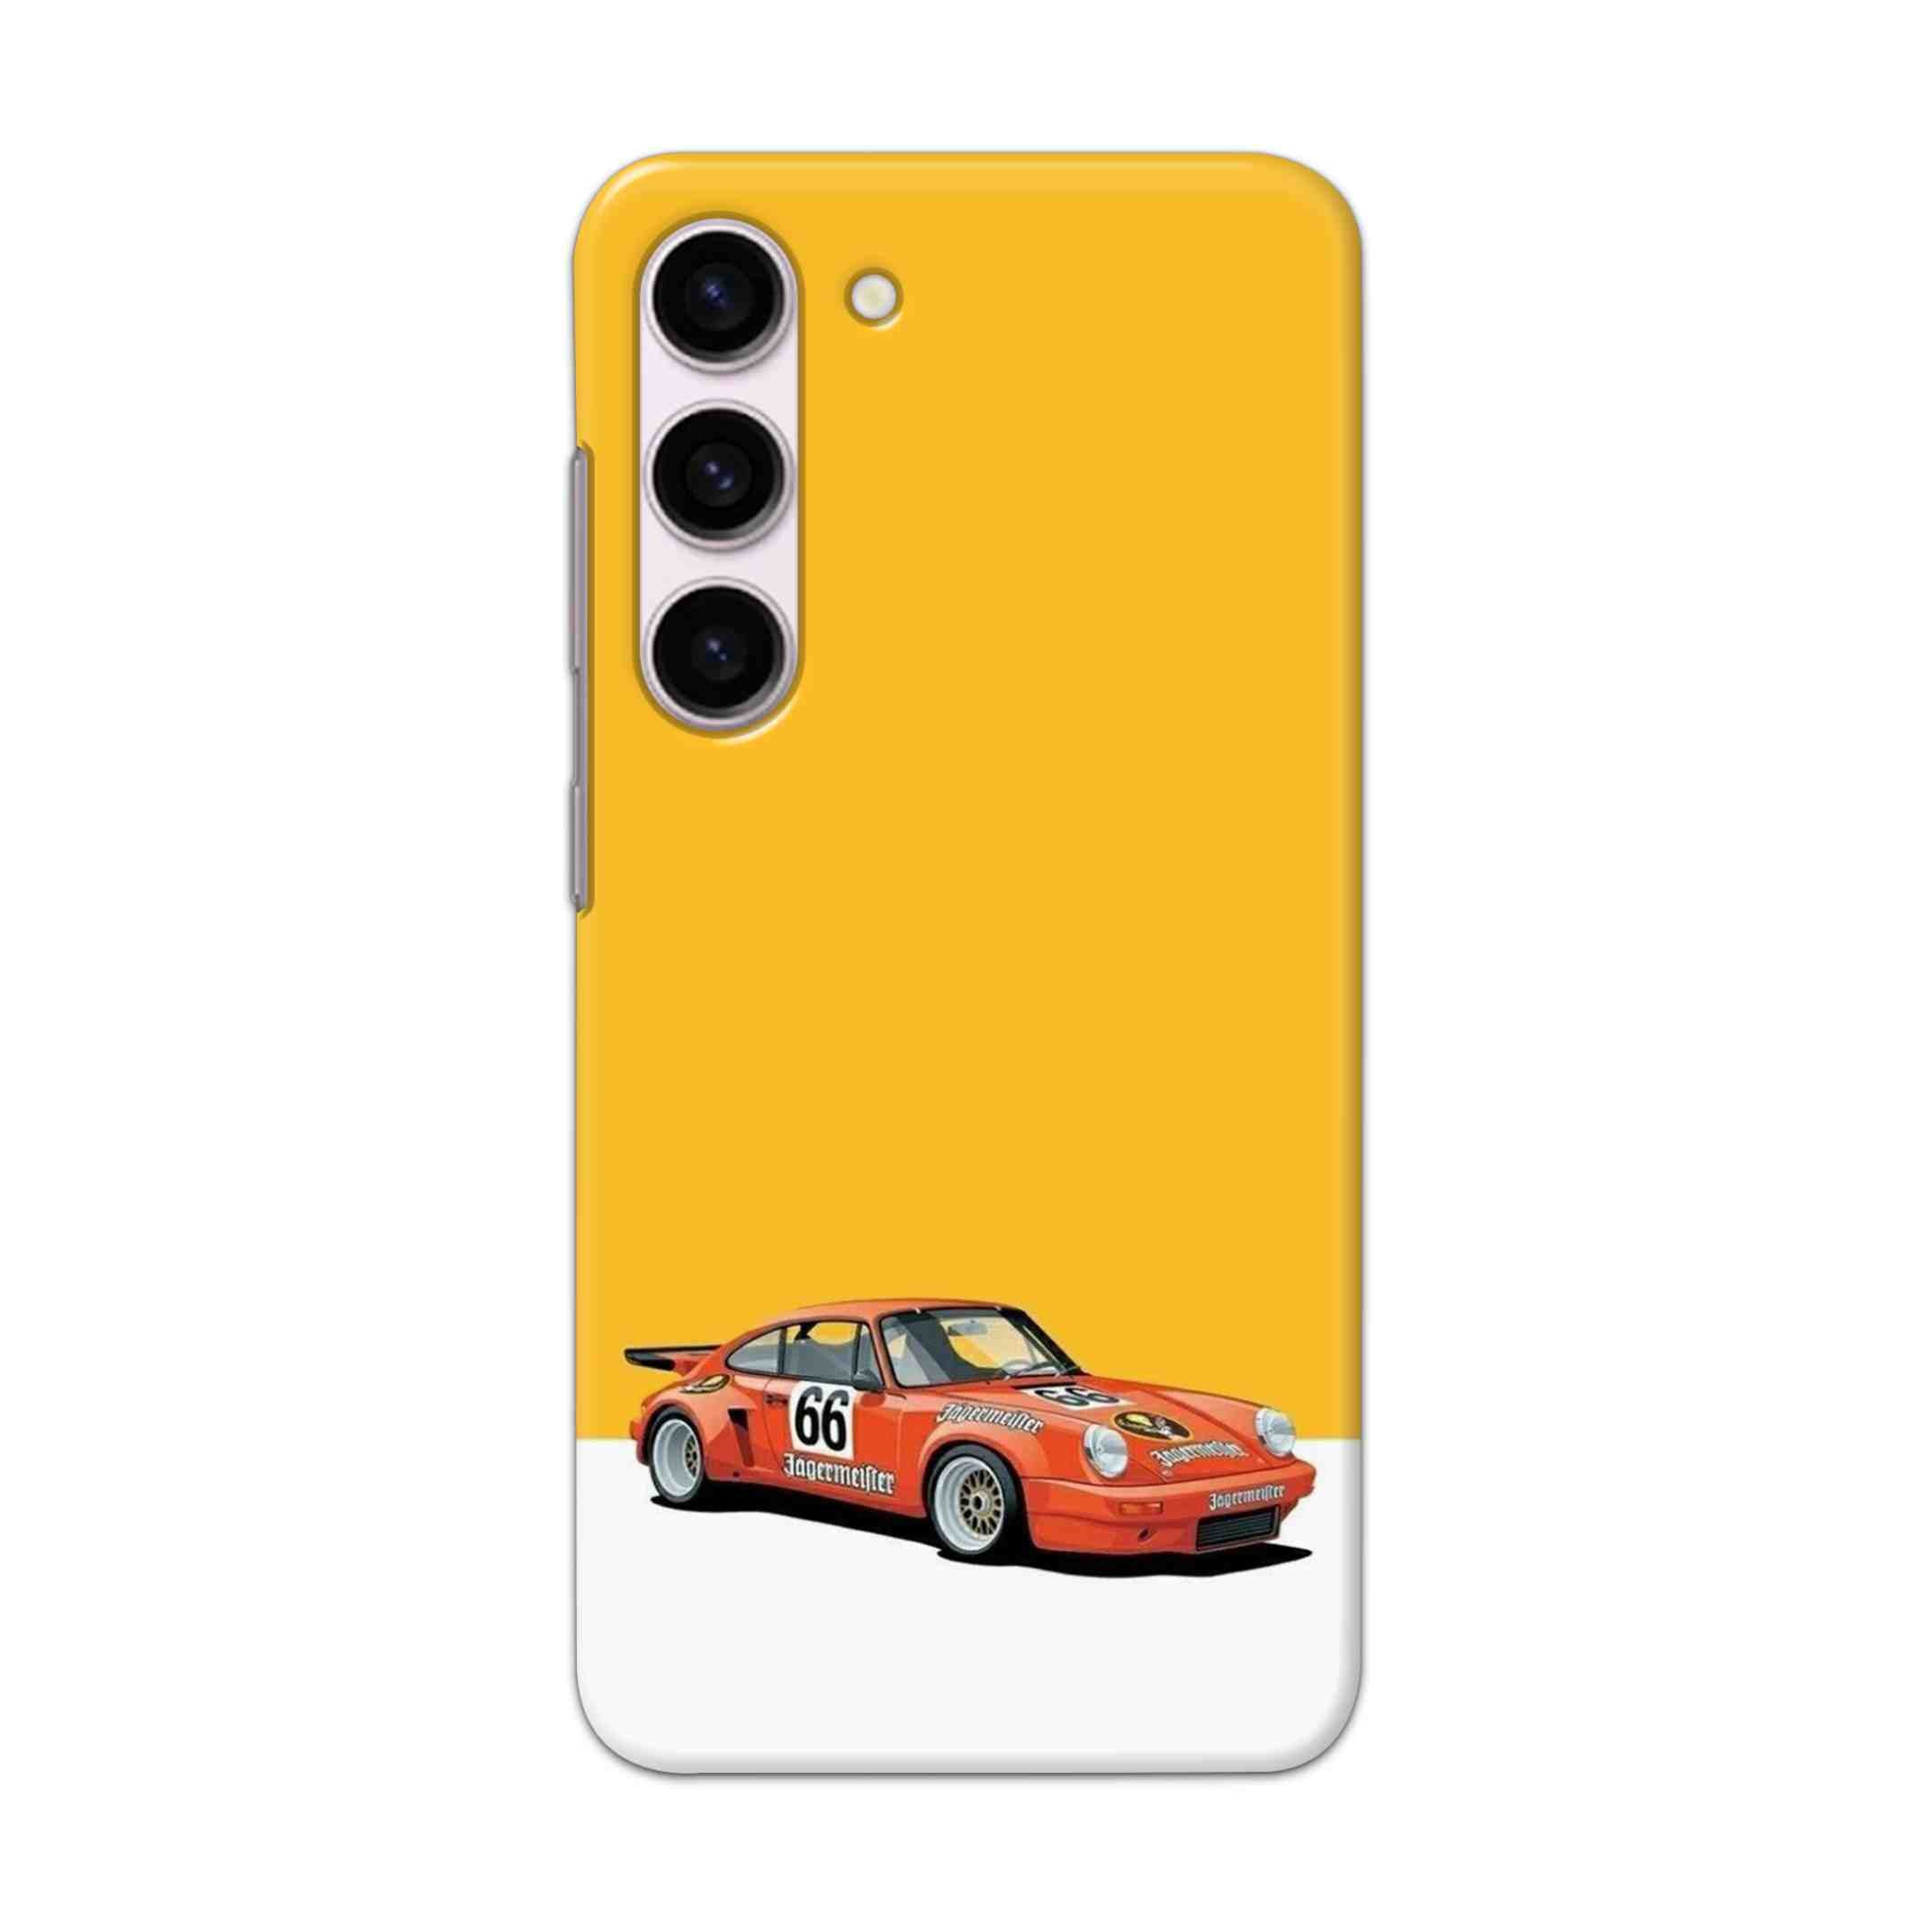 Buy Porche Hard Back Mobile Phone Case Cover For Samsung Galaxy S23 Online